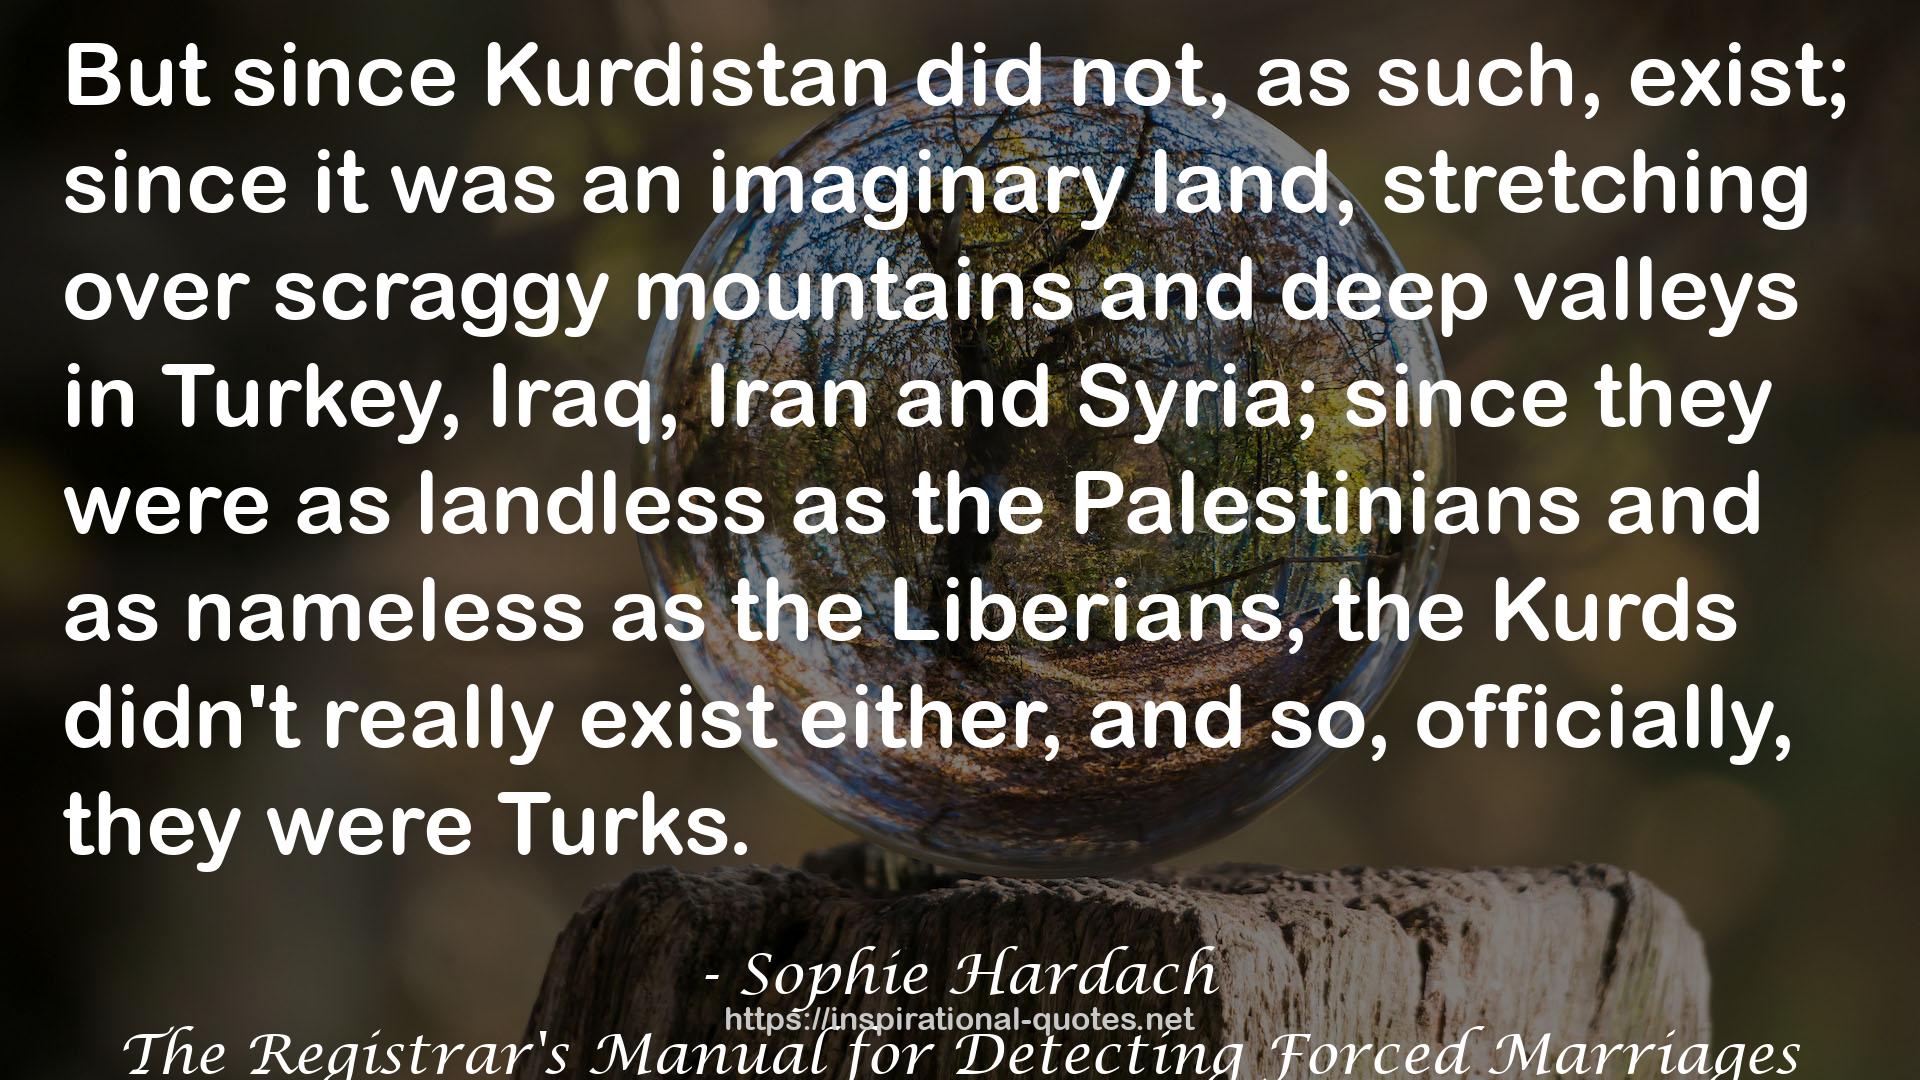 Sophie Hardach QUOTES